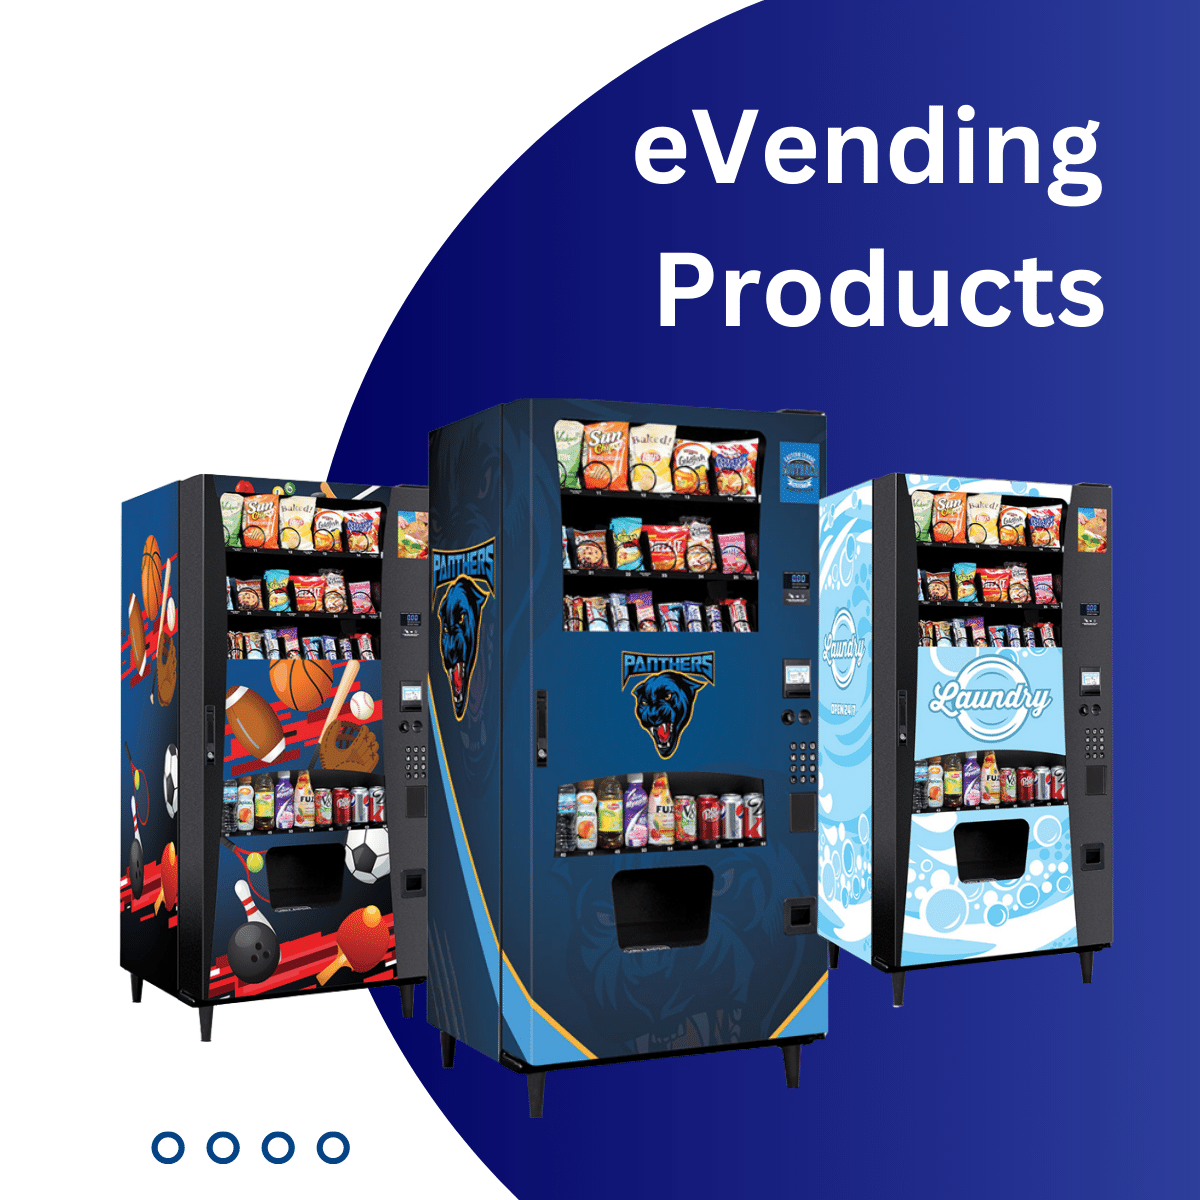 REGARDLESS OF LOCATION, A COMBO VENDING MACHINE IS IDEAL